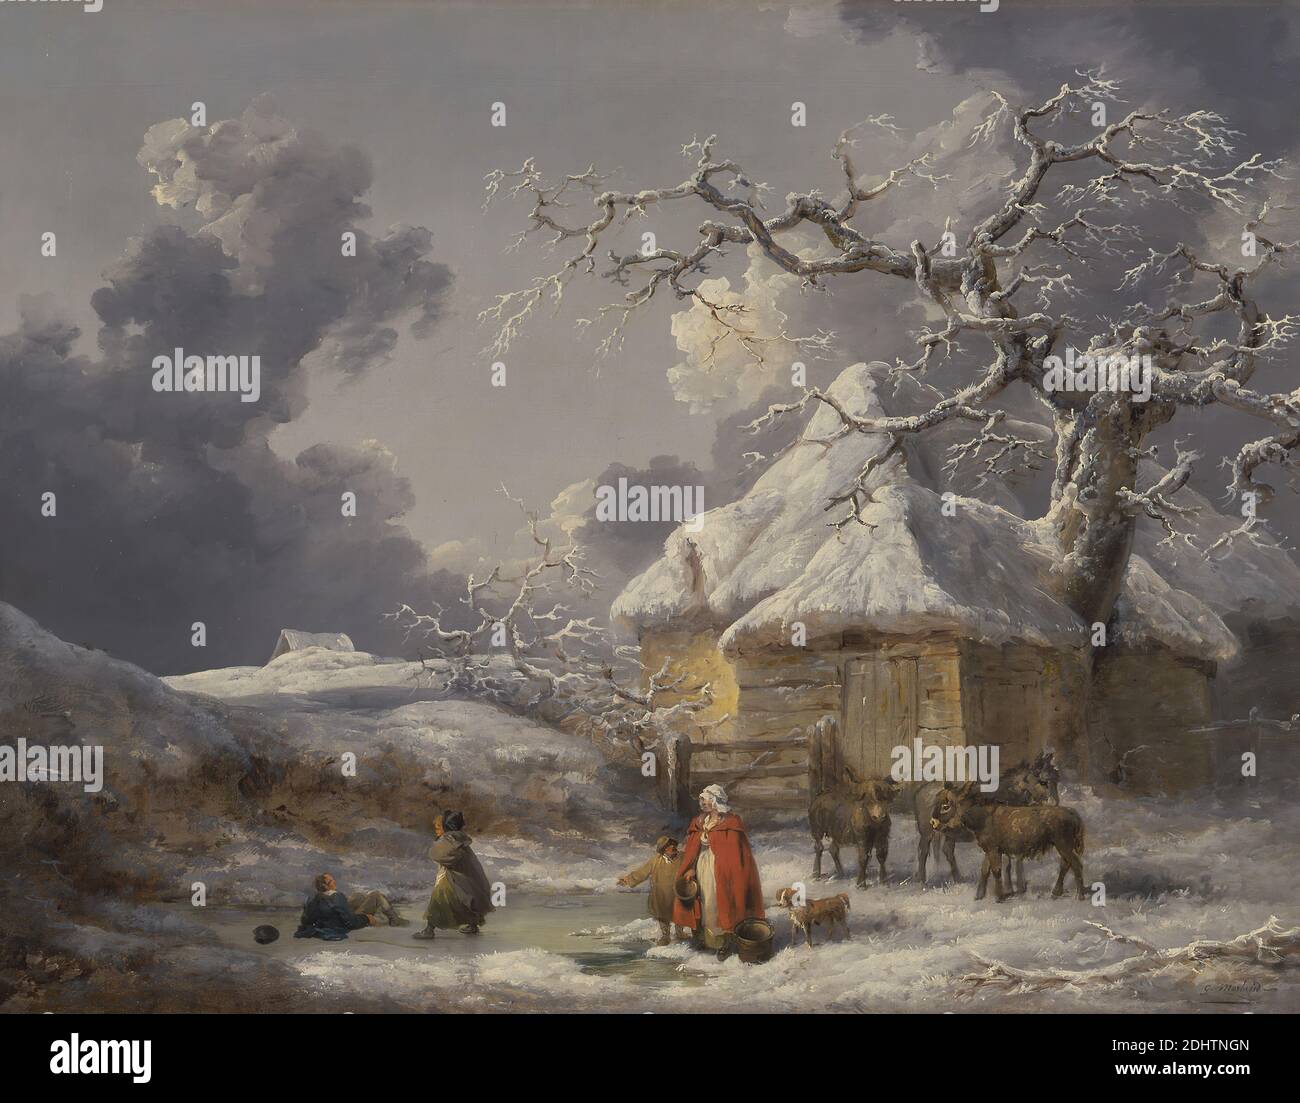 Winter Landscape with Figures, George Morland, 1763–1804, British, ca. 1785, Oil on canvas, Support (PTG): 28 1/2 x 36 1/2 inches (72.4 x 92.7 cm), animals, bonnet, cane, cape, child, clouds, cold, cottage, dog (animal), donkeys, family, farmhouses, frozen, games, hills, hounds (dogs), ice, landscape, men, outerwear, pond, redingote (overcoat), rural, shawl, shawls, sky, snow, top hat, trees, winter, woman, women Stock Photo